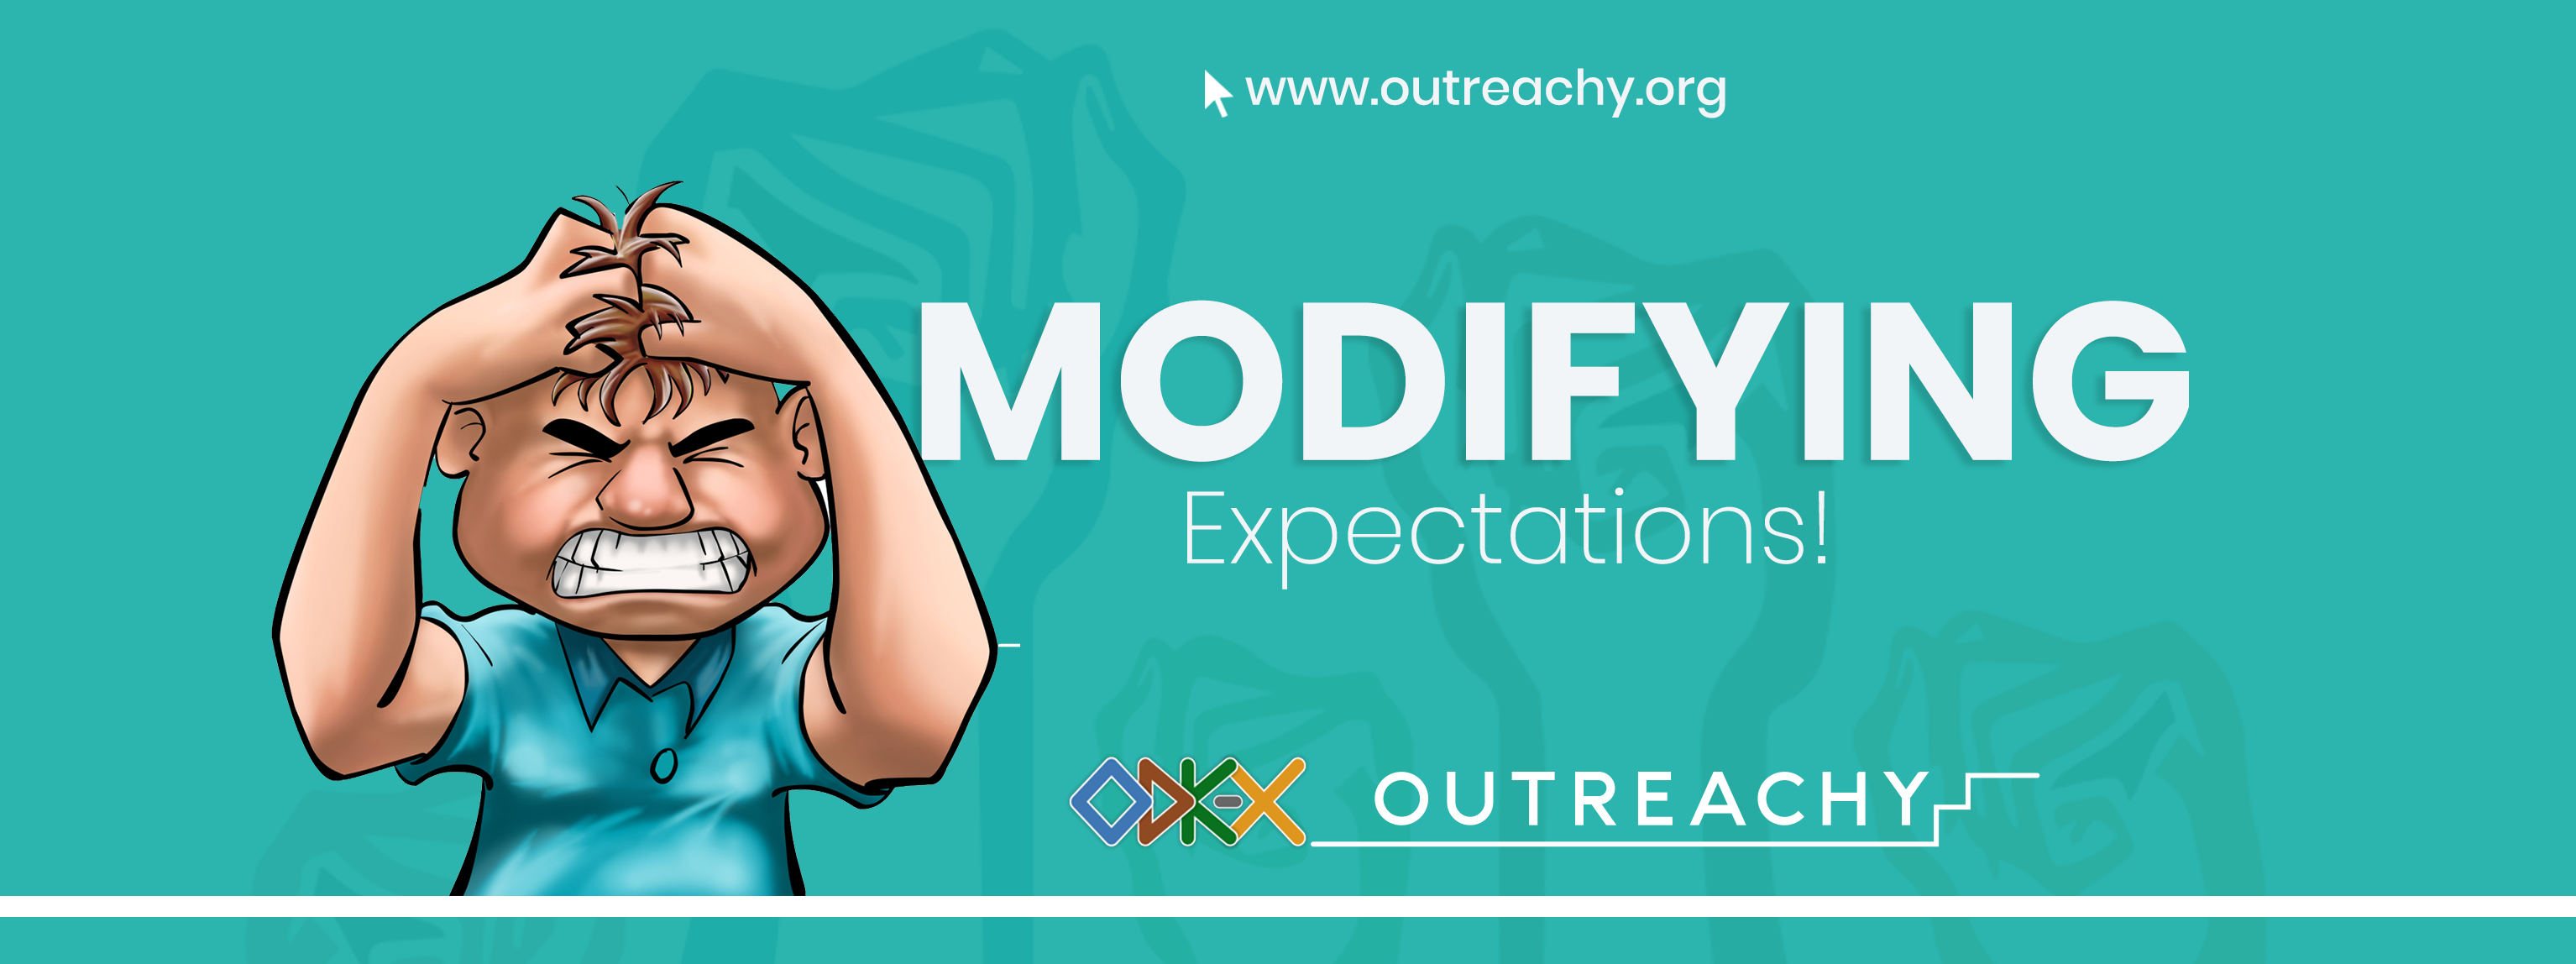 Outreachy Week 6: Modifying Expectations